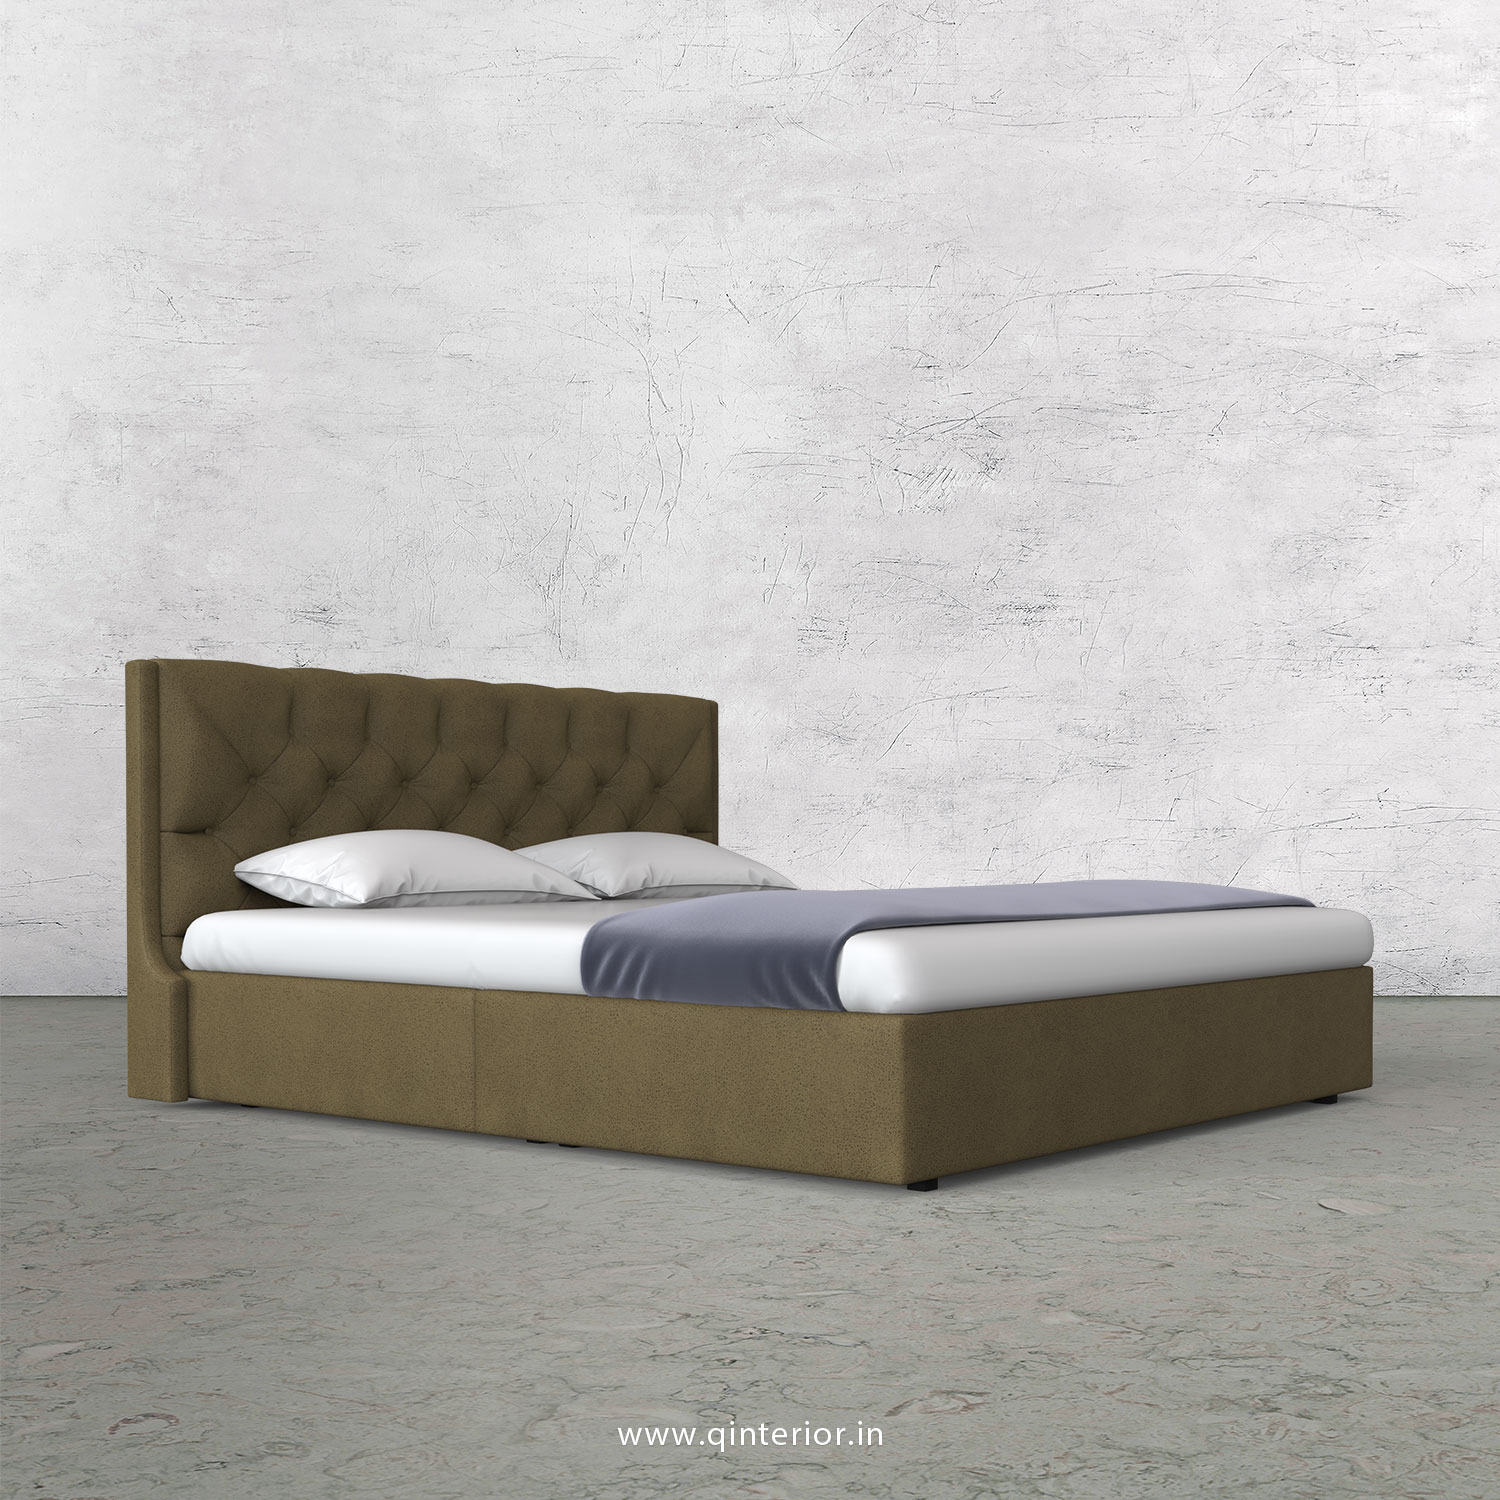 Scorpius Queen Bed in Fab Leather Fabric - QBD009 FL01